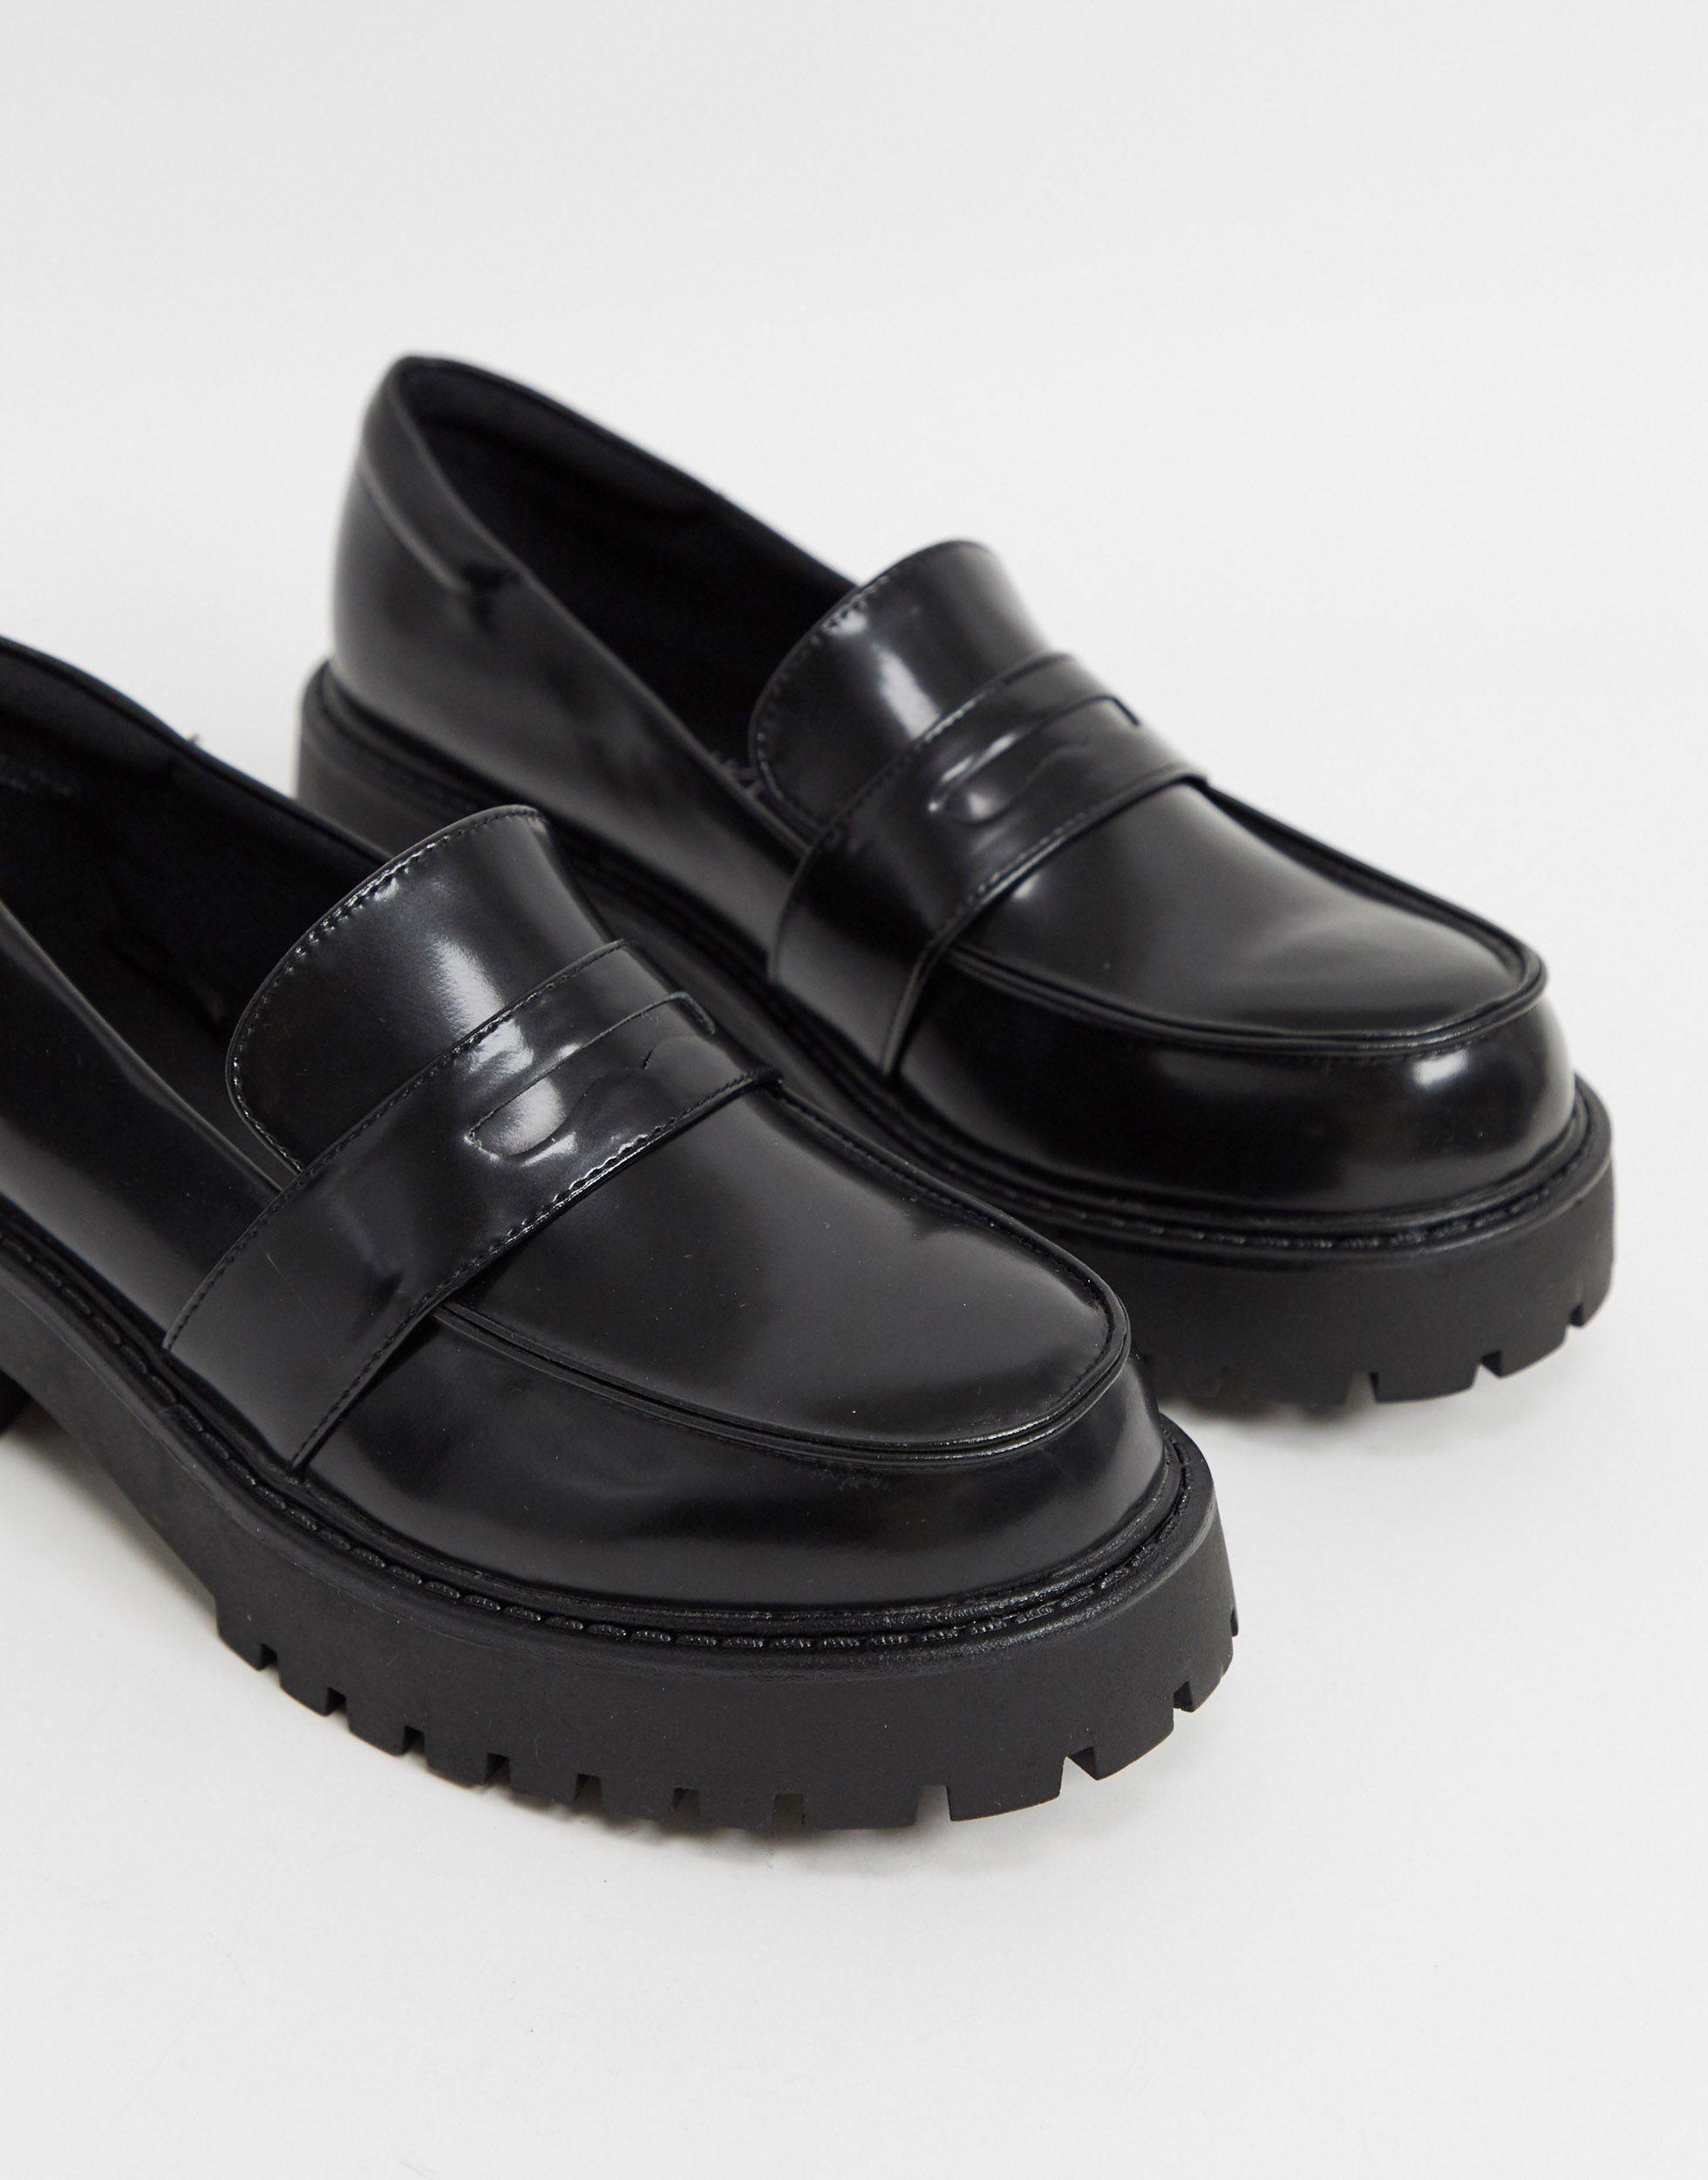 Cradle retreat hope Monki June Chunky Faux Leather Loafer in Black | Lyst